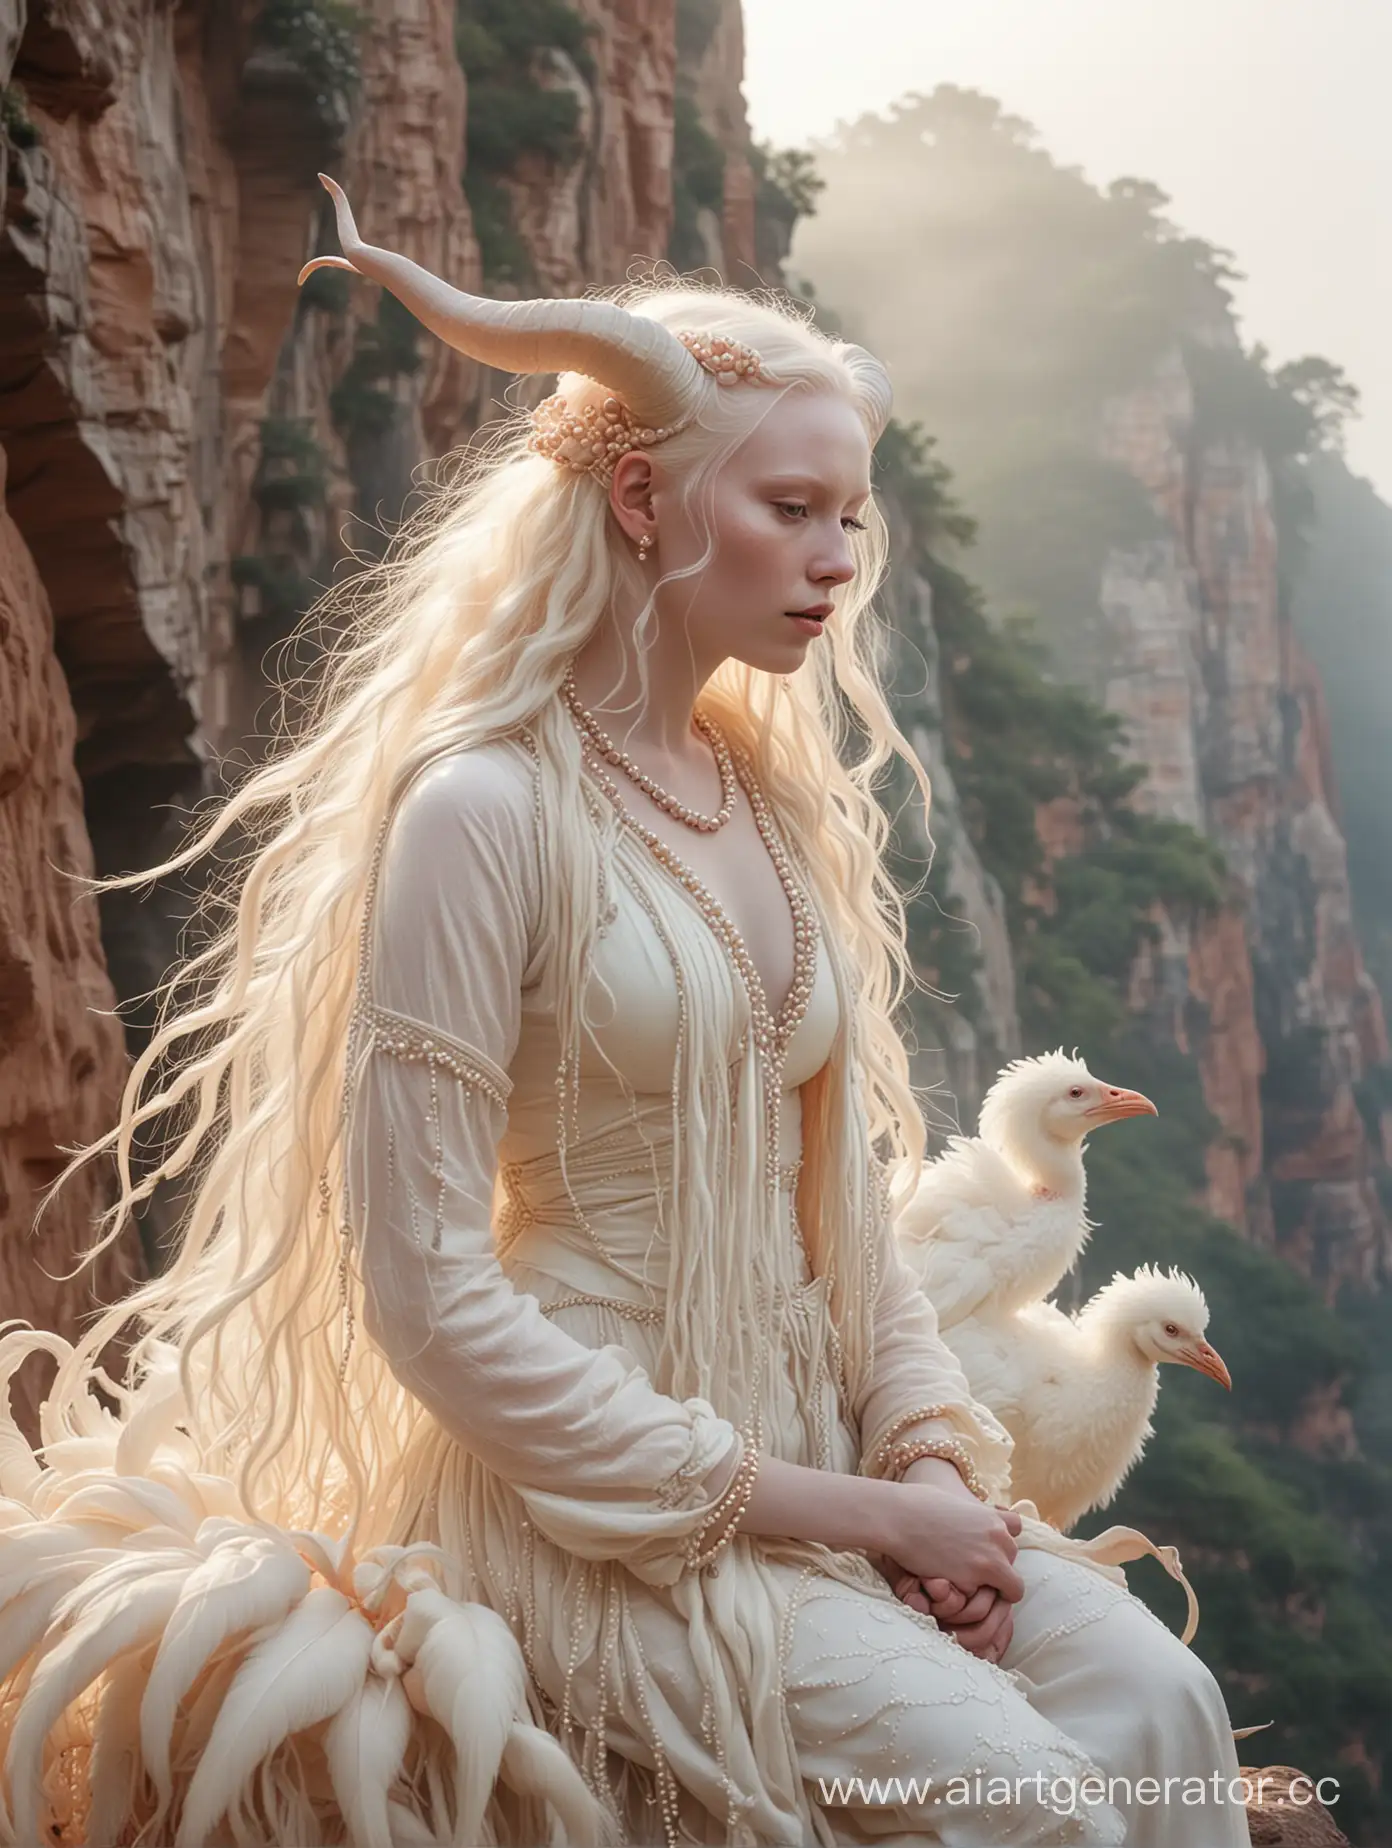 Dawn lighting. Soft pastel colors. Fog and mist. Between dusty cliff edges. A fair skinned albino majestic woman with huge bended fleshy horns and pointed fleshy ears. She has super long half braided flowy hair. Fabric and lots of pearls wrapped around her body, fluttering in the wind. Riding upon a big albino fluffy dodo bird, covered in pearls. Riding on a cliff edge